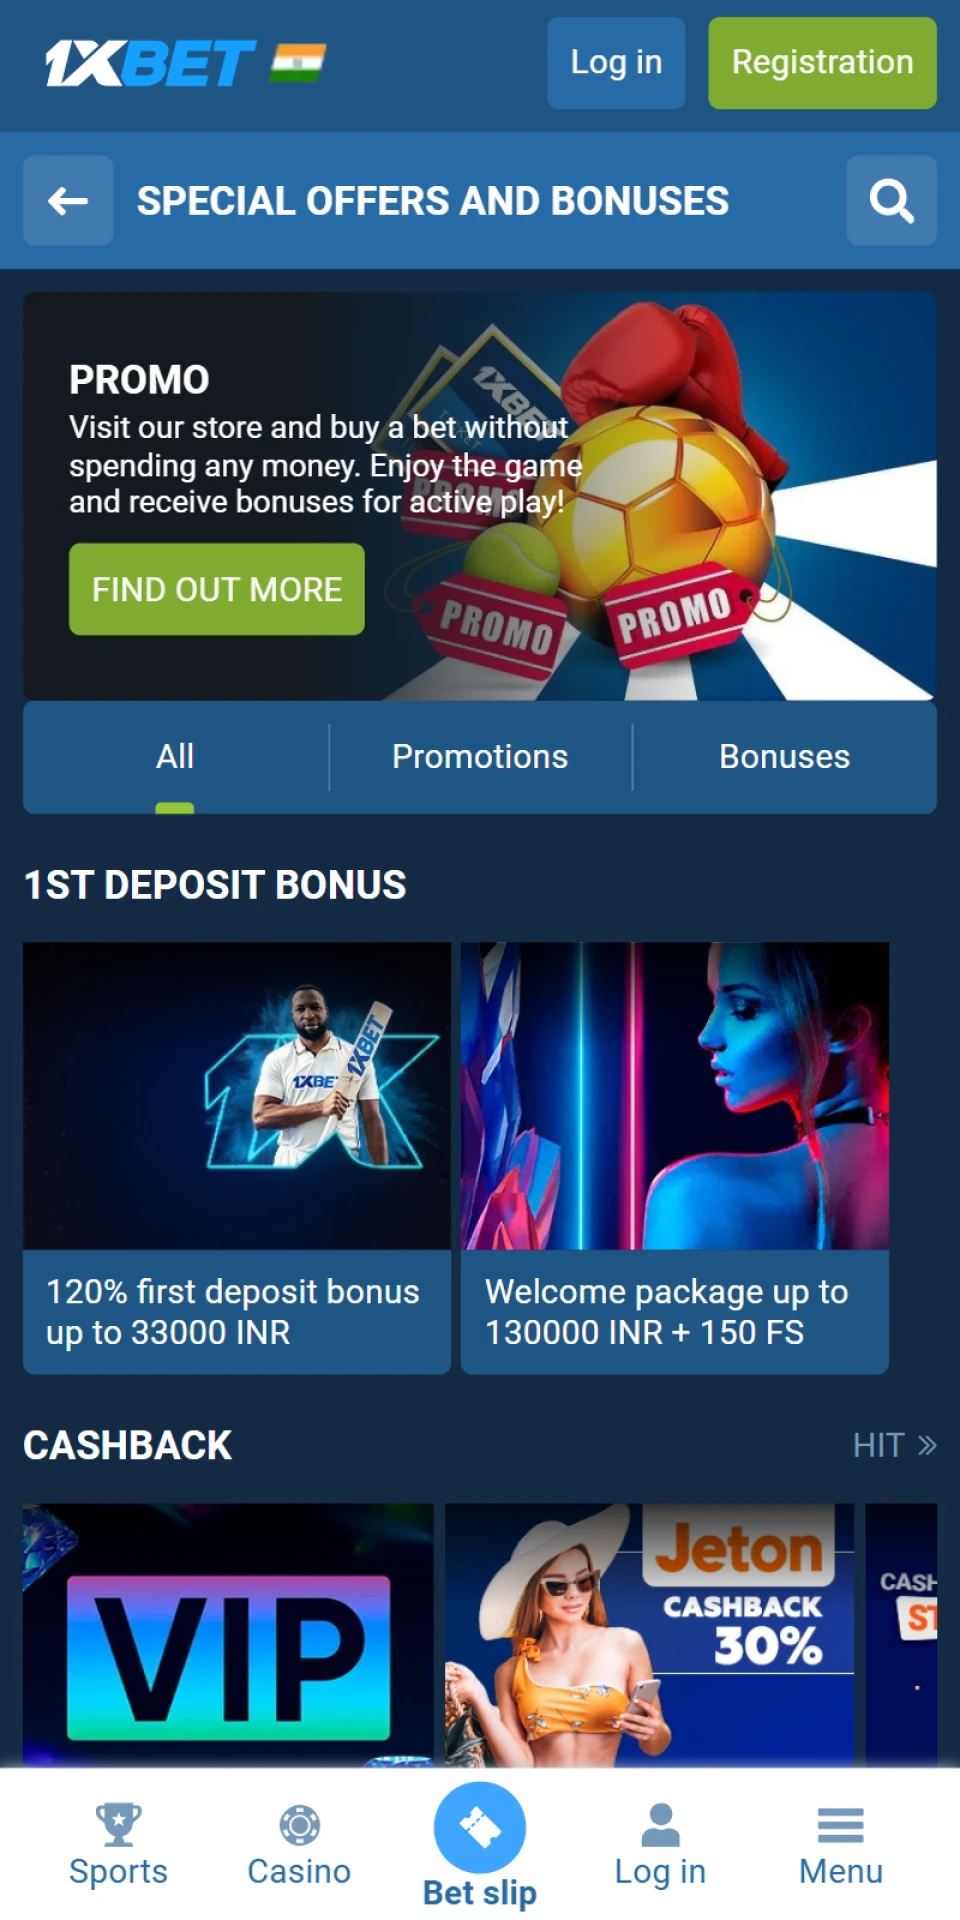 In the bonus section of the 1xBet app, select your favorite one.